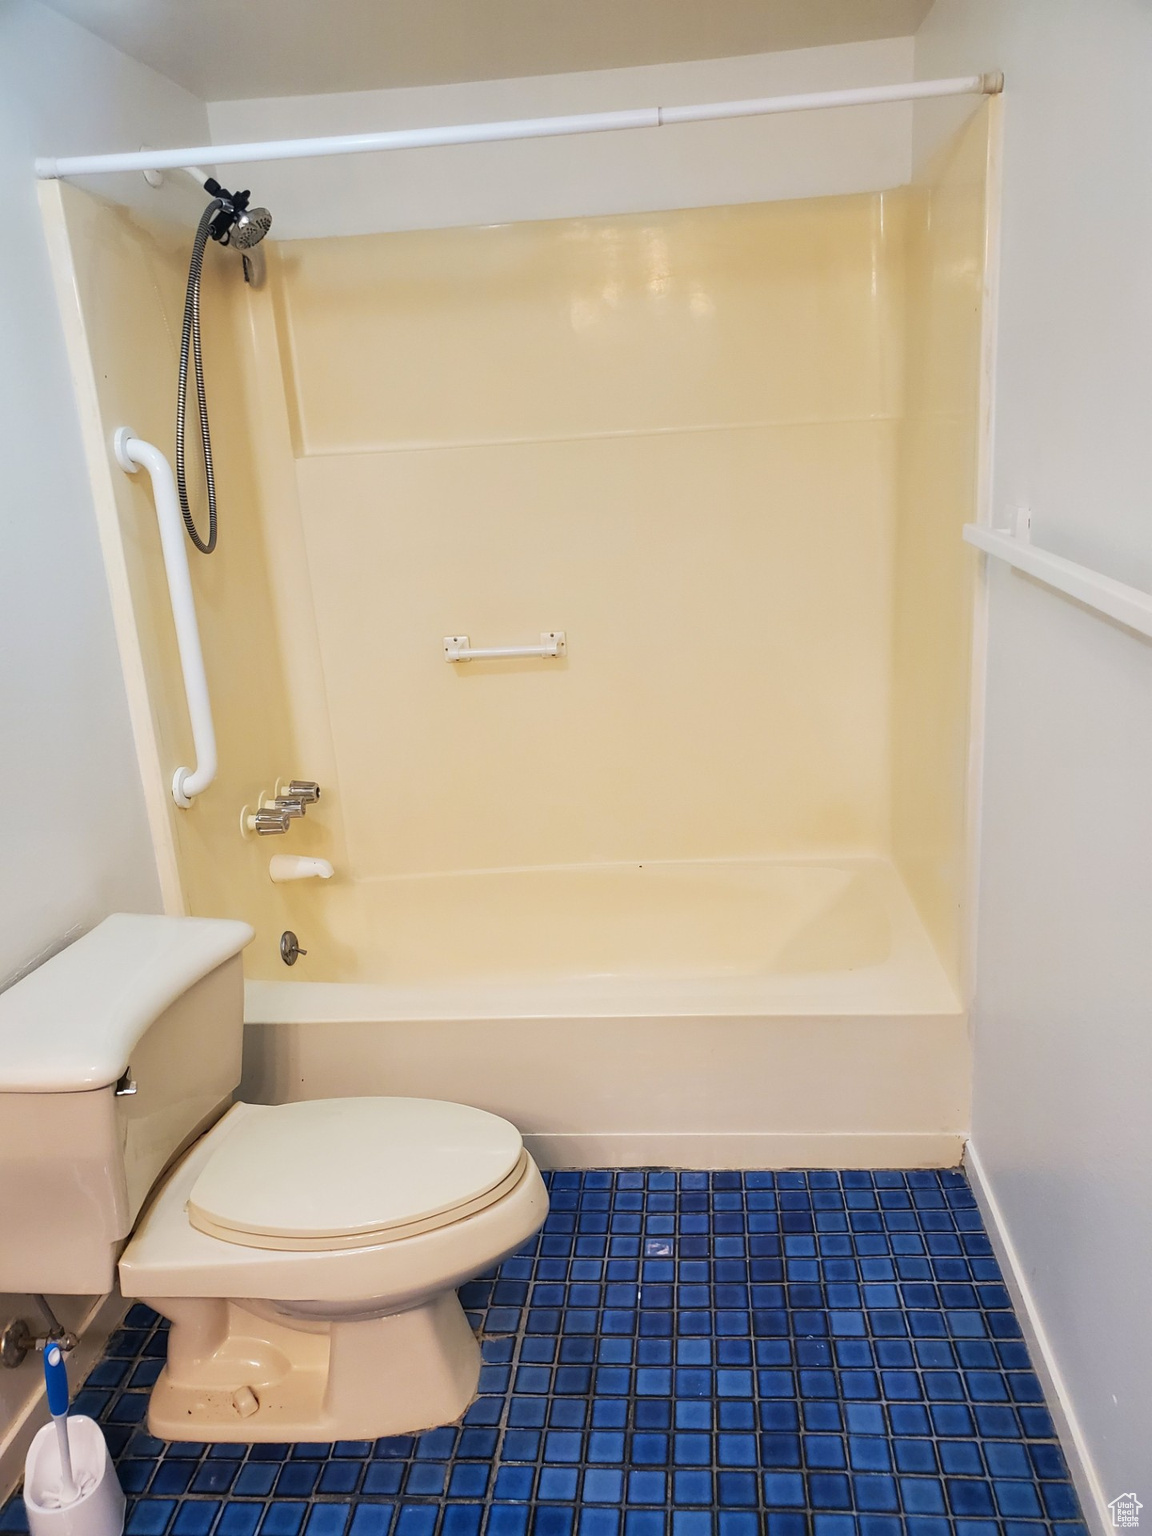 Bathroom with tile floors, shower / bathing tub combination, and toilet